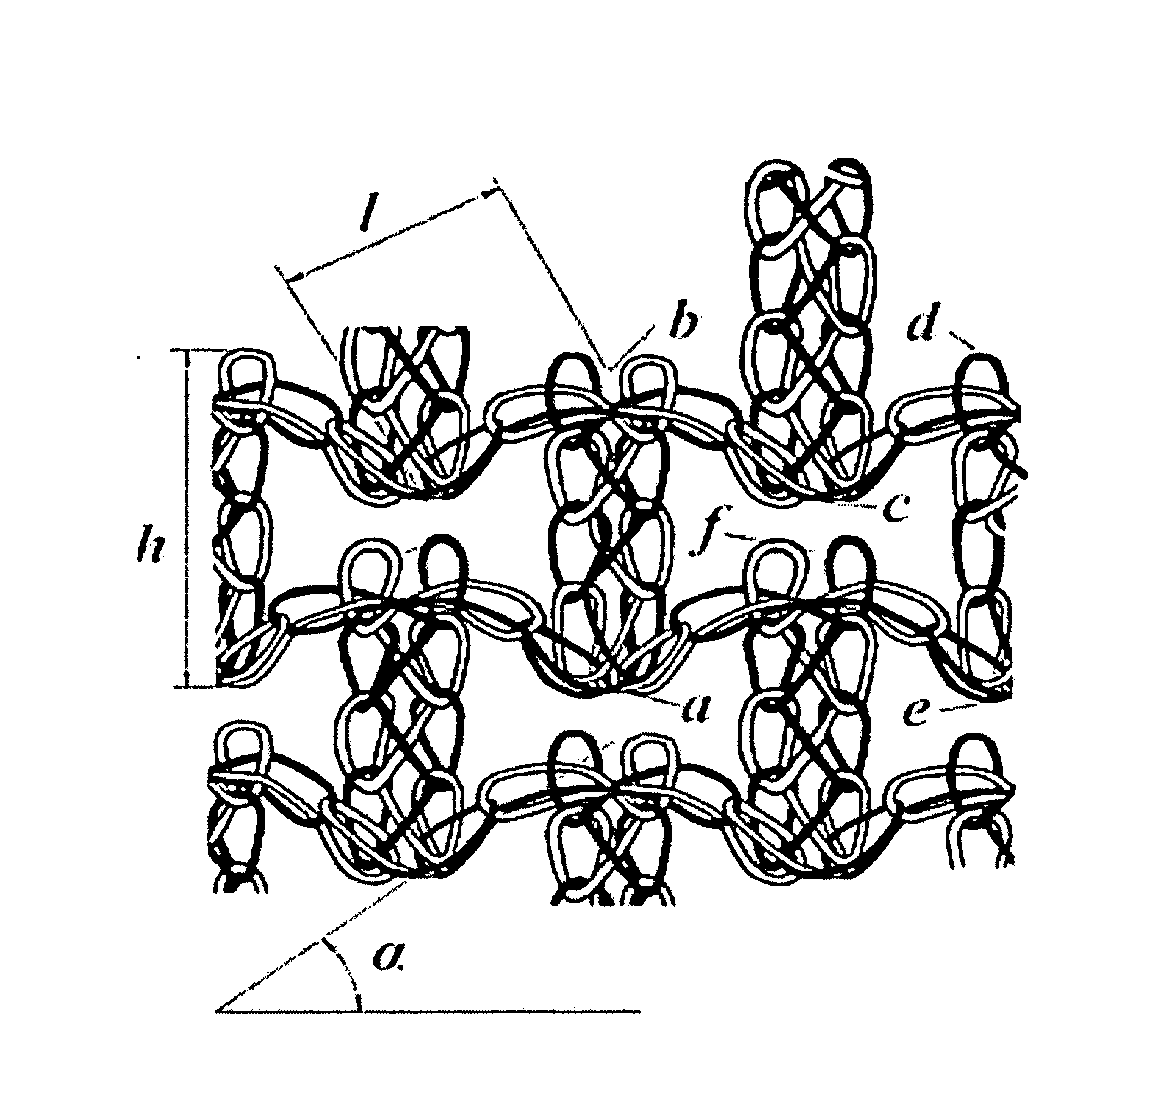 Auxetic Fabric Structures and Related Fabrication Methods